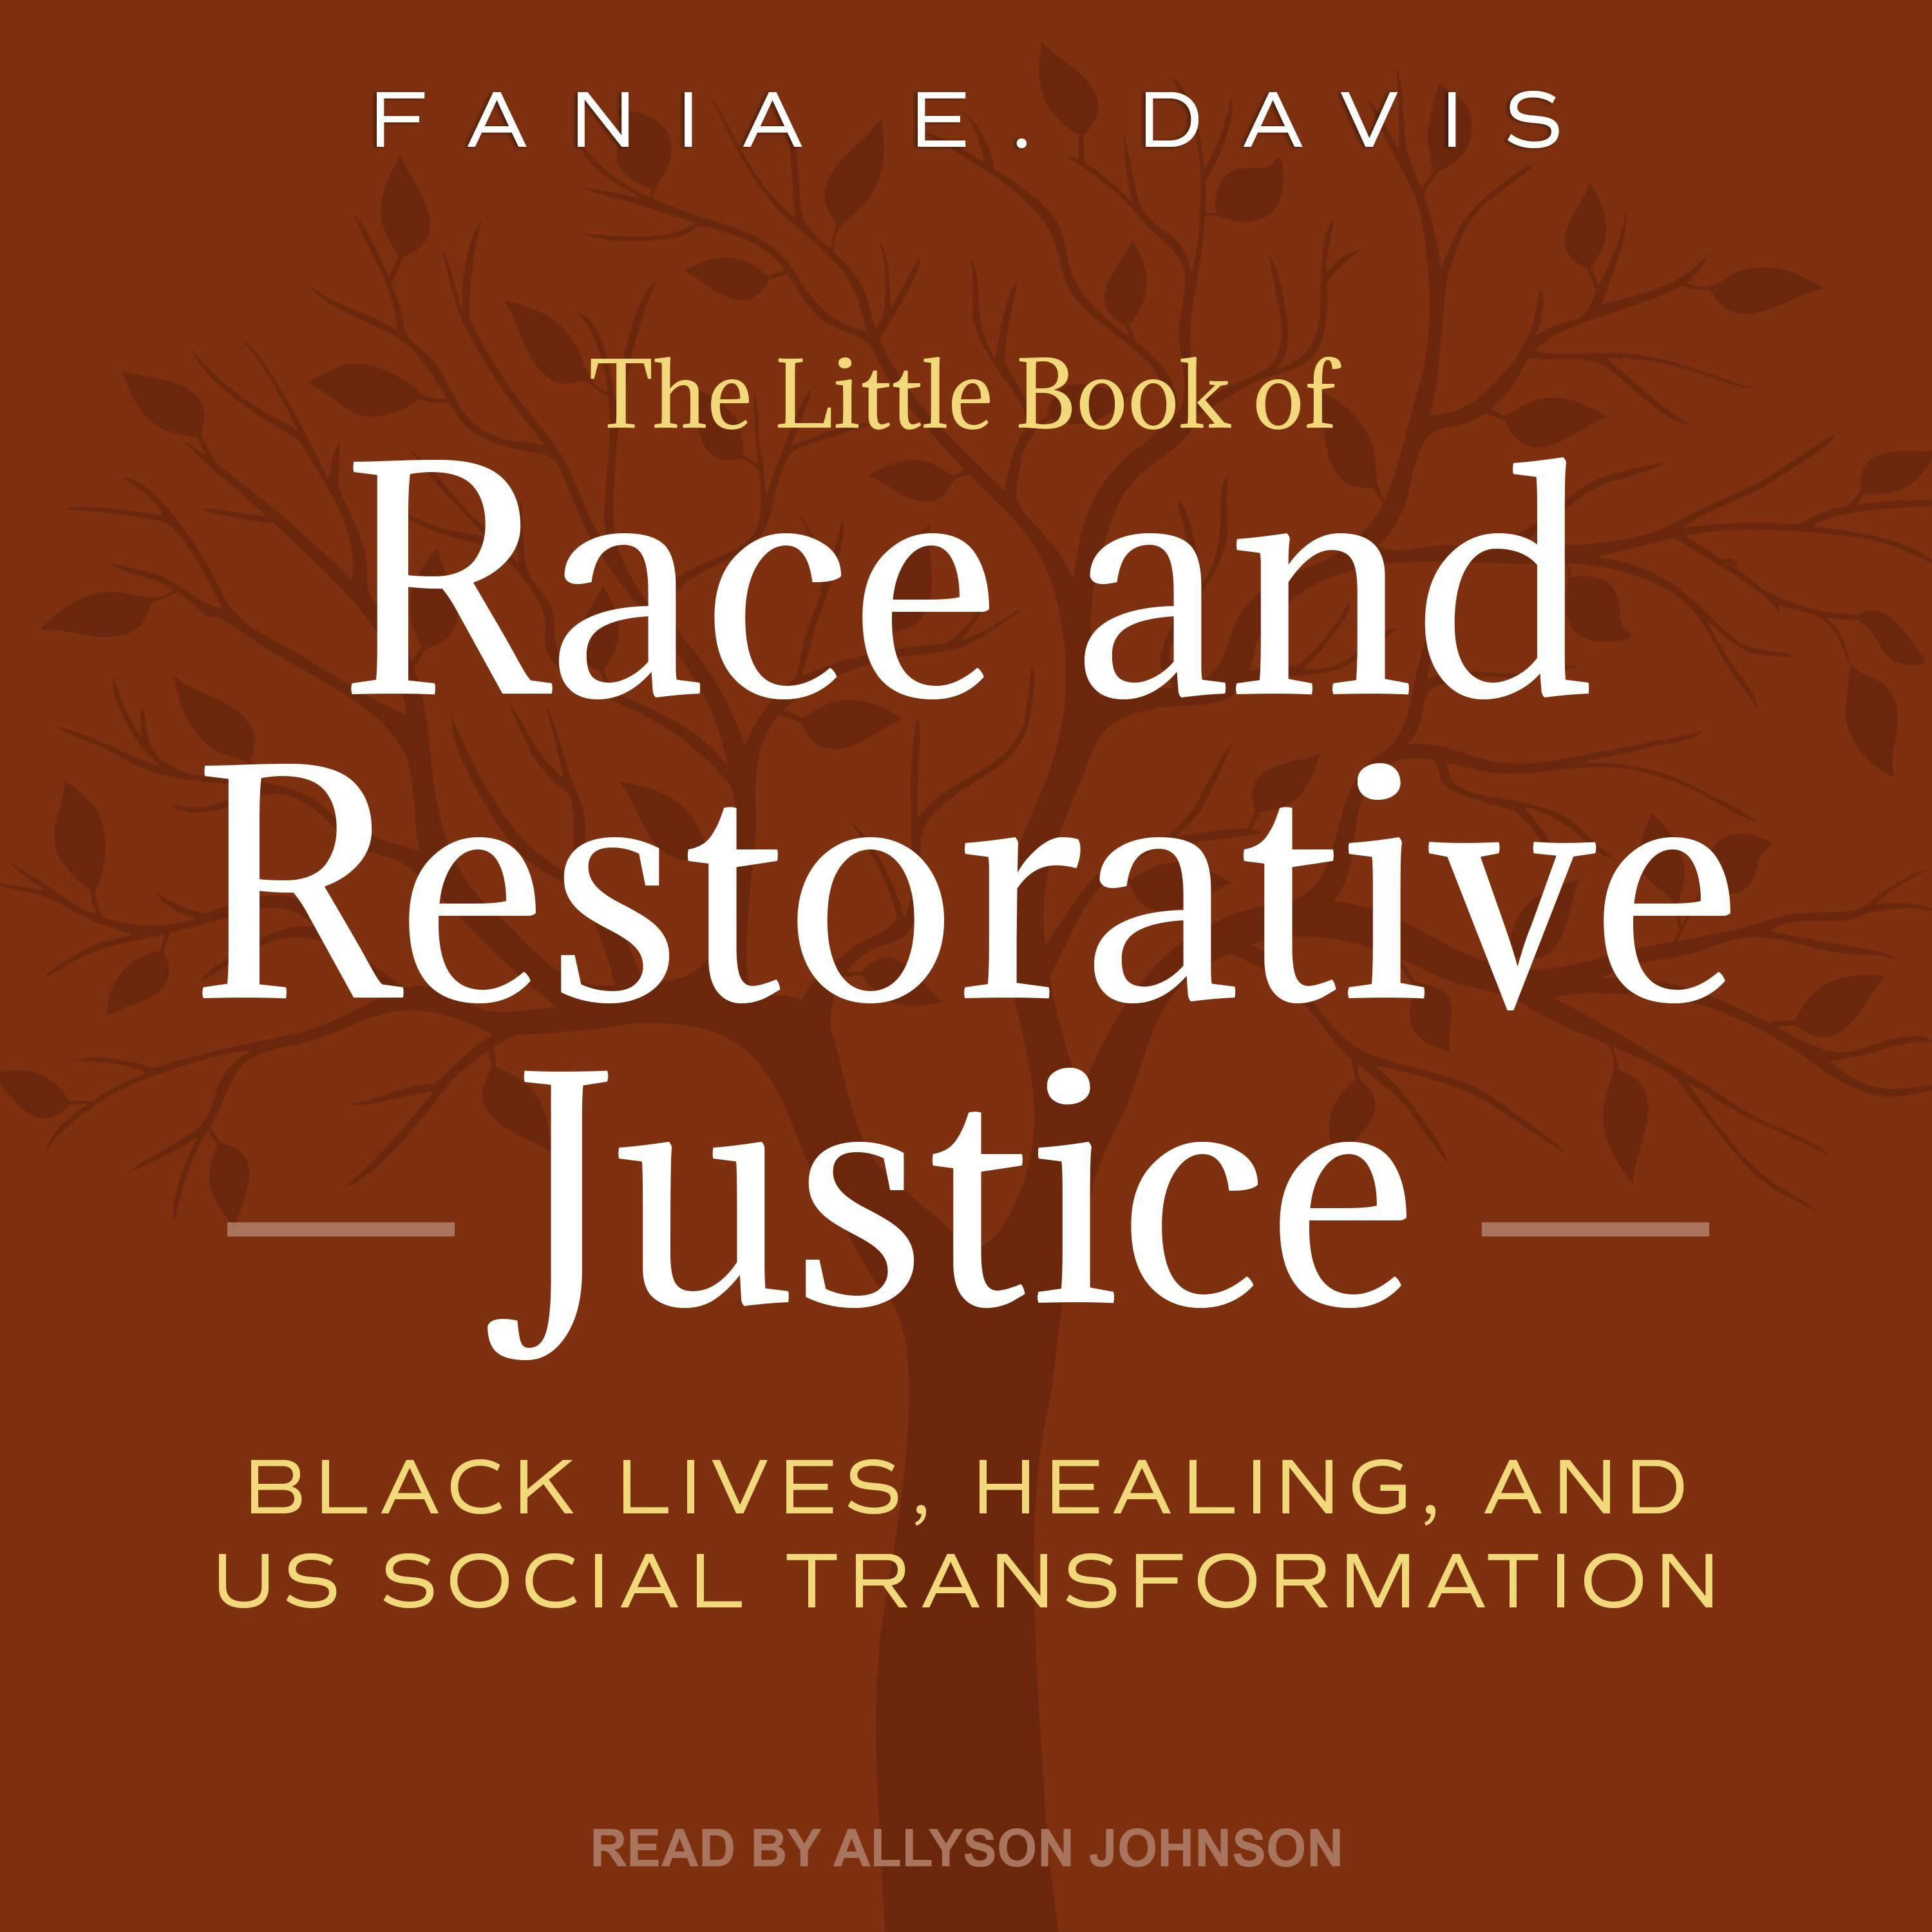 The Little Book of Race and Restorative Justice: Black Lives, Healing, and US Social Transformation - Fania E. Davis